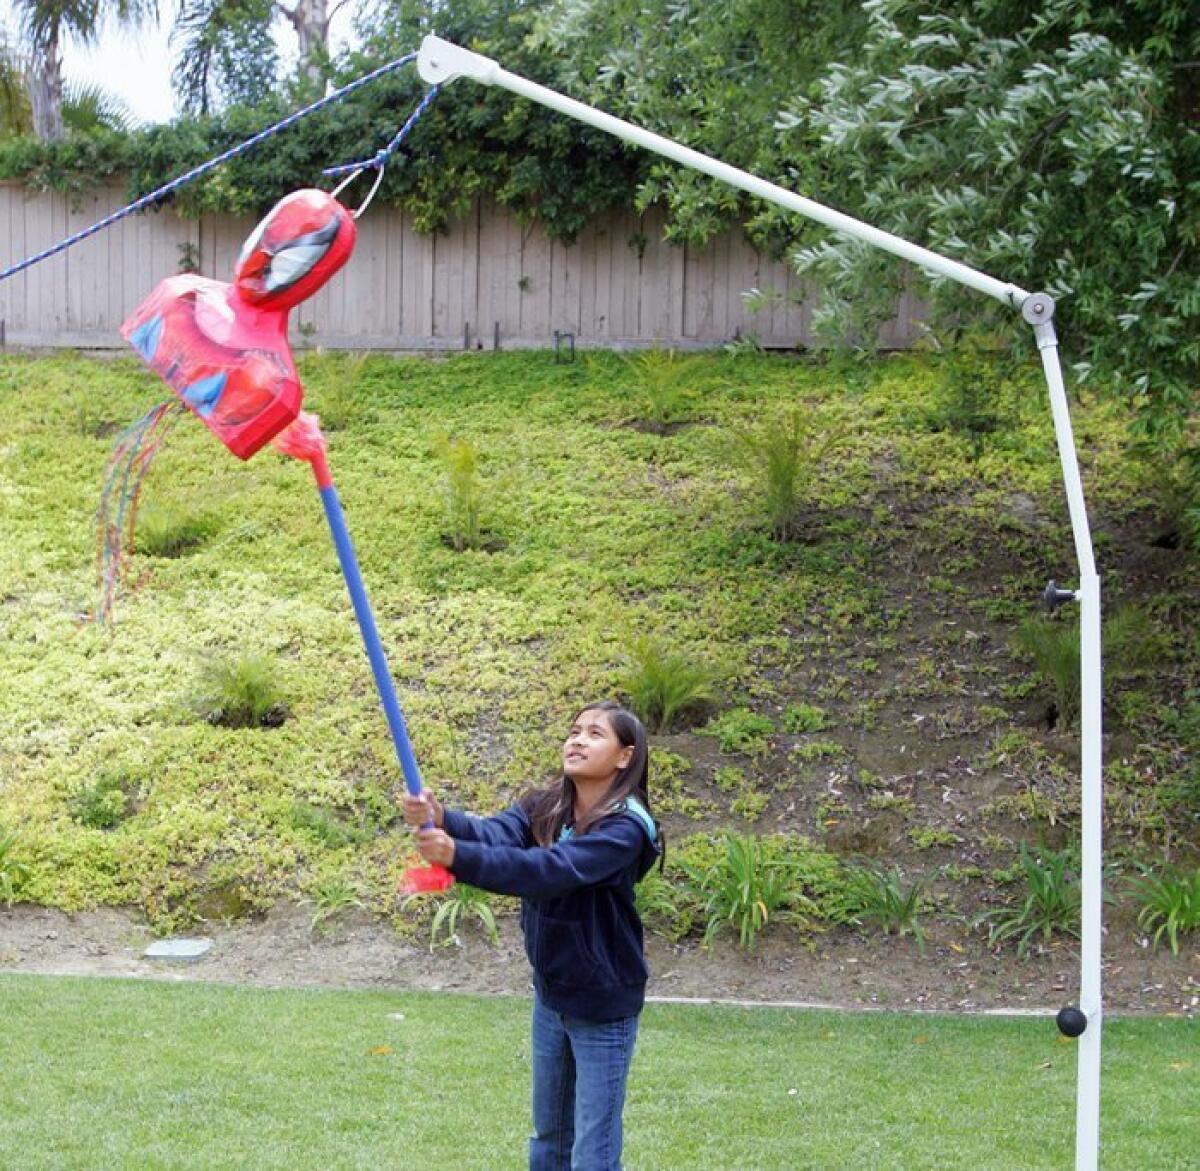 Father pins hopes on patented piñata holder - The San Diego Union-Tribune